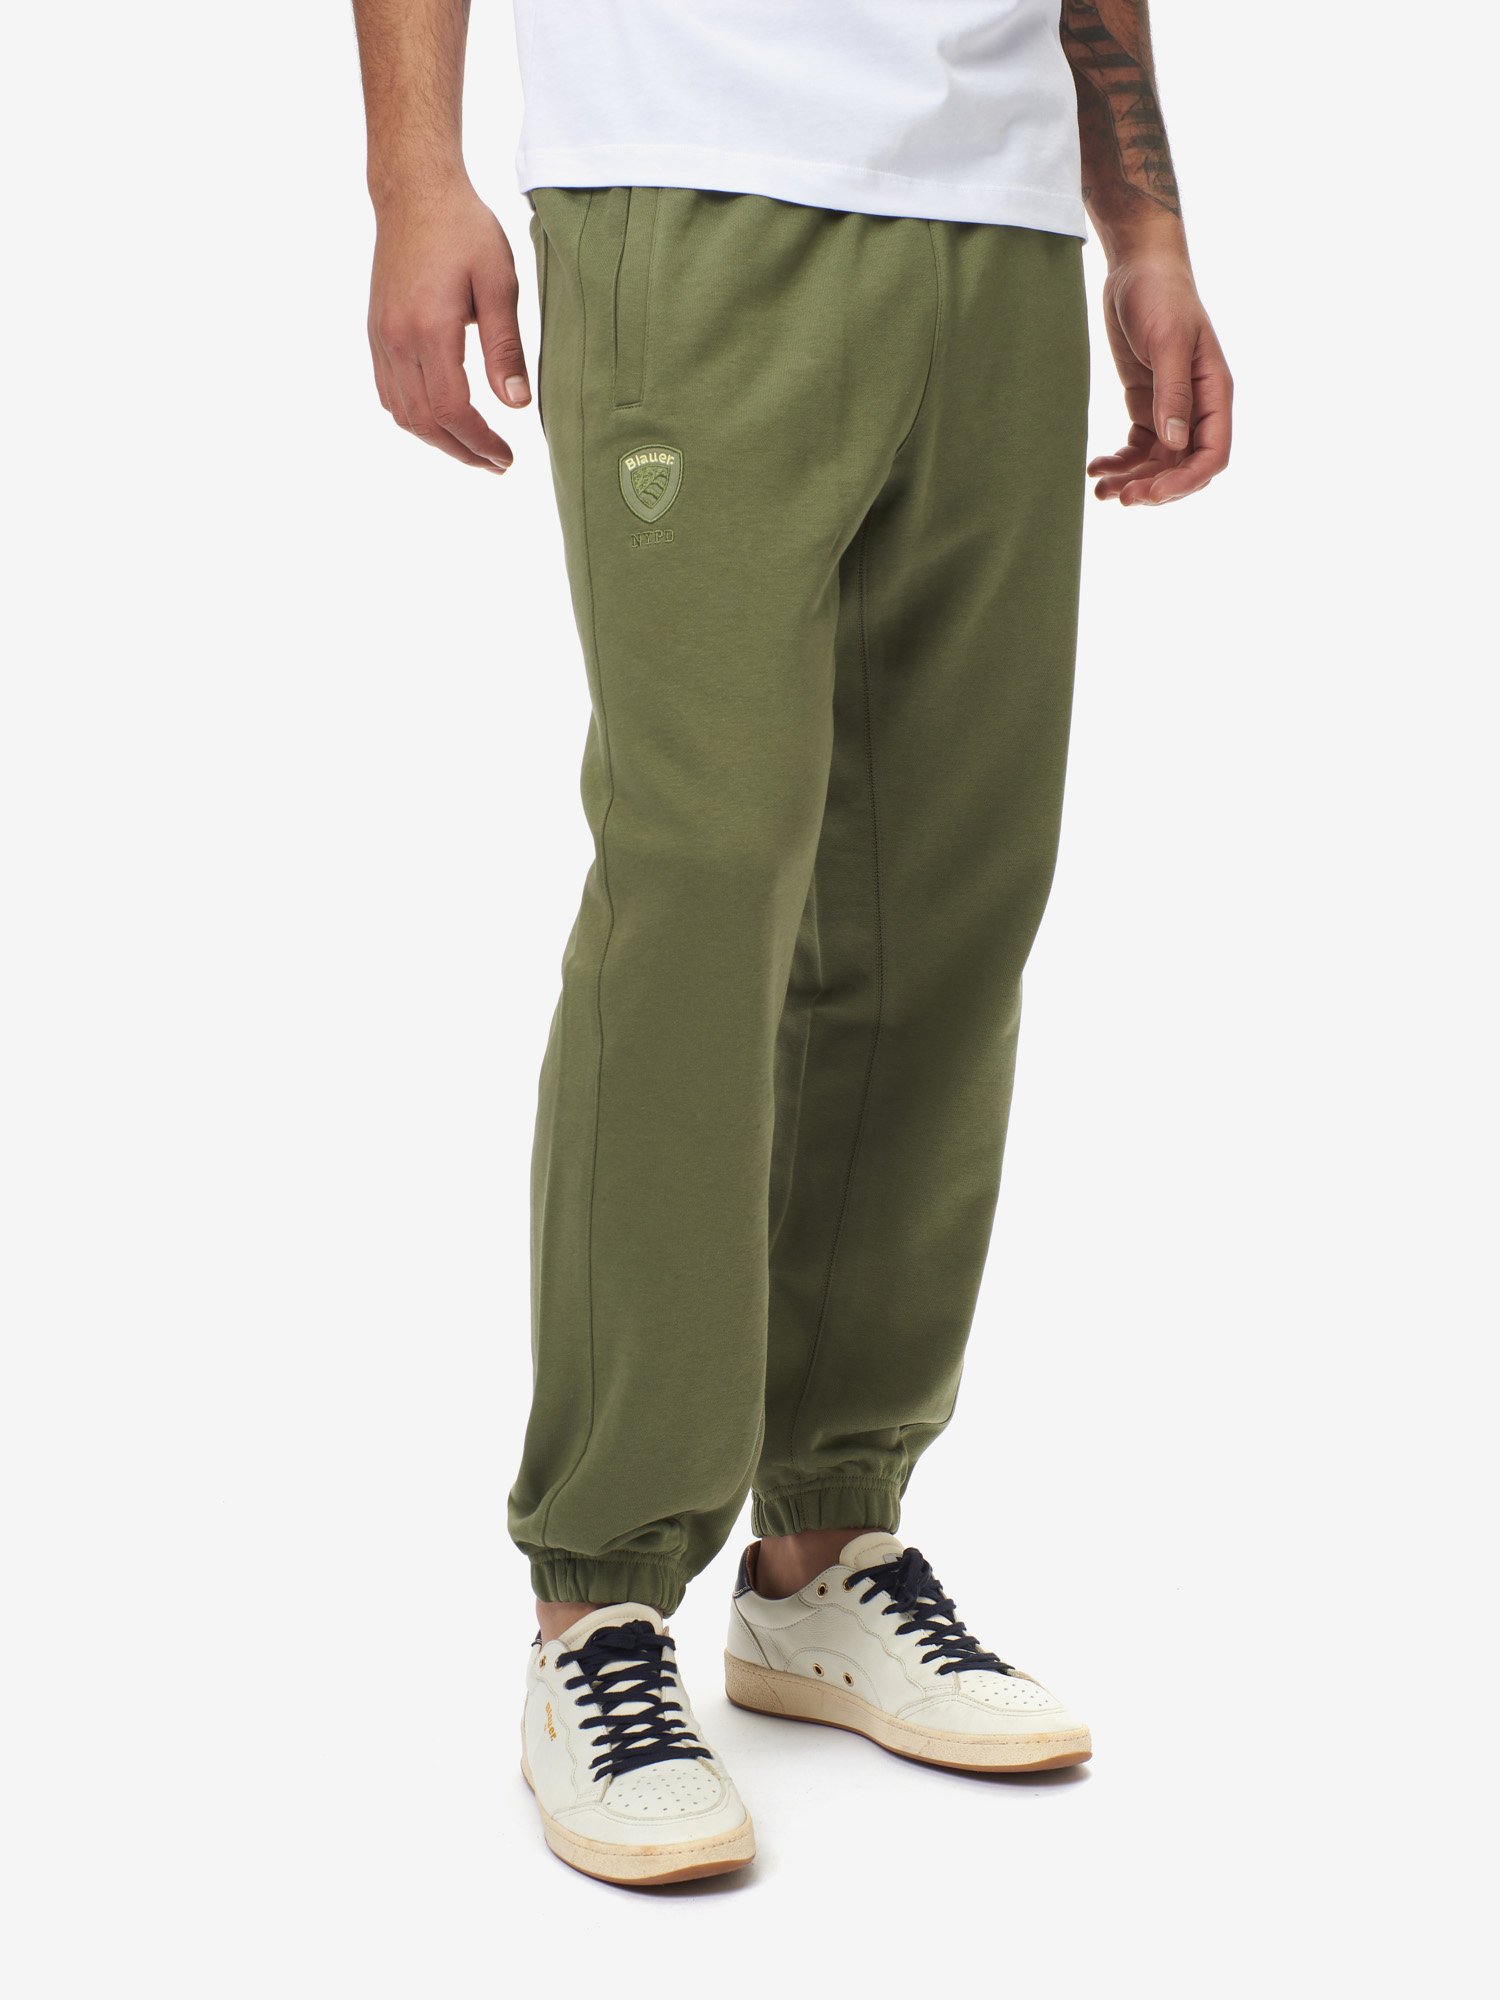 SALE\'s Trousers With Drawstring | Blauer ® | Klassische Strings